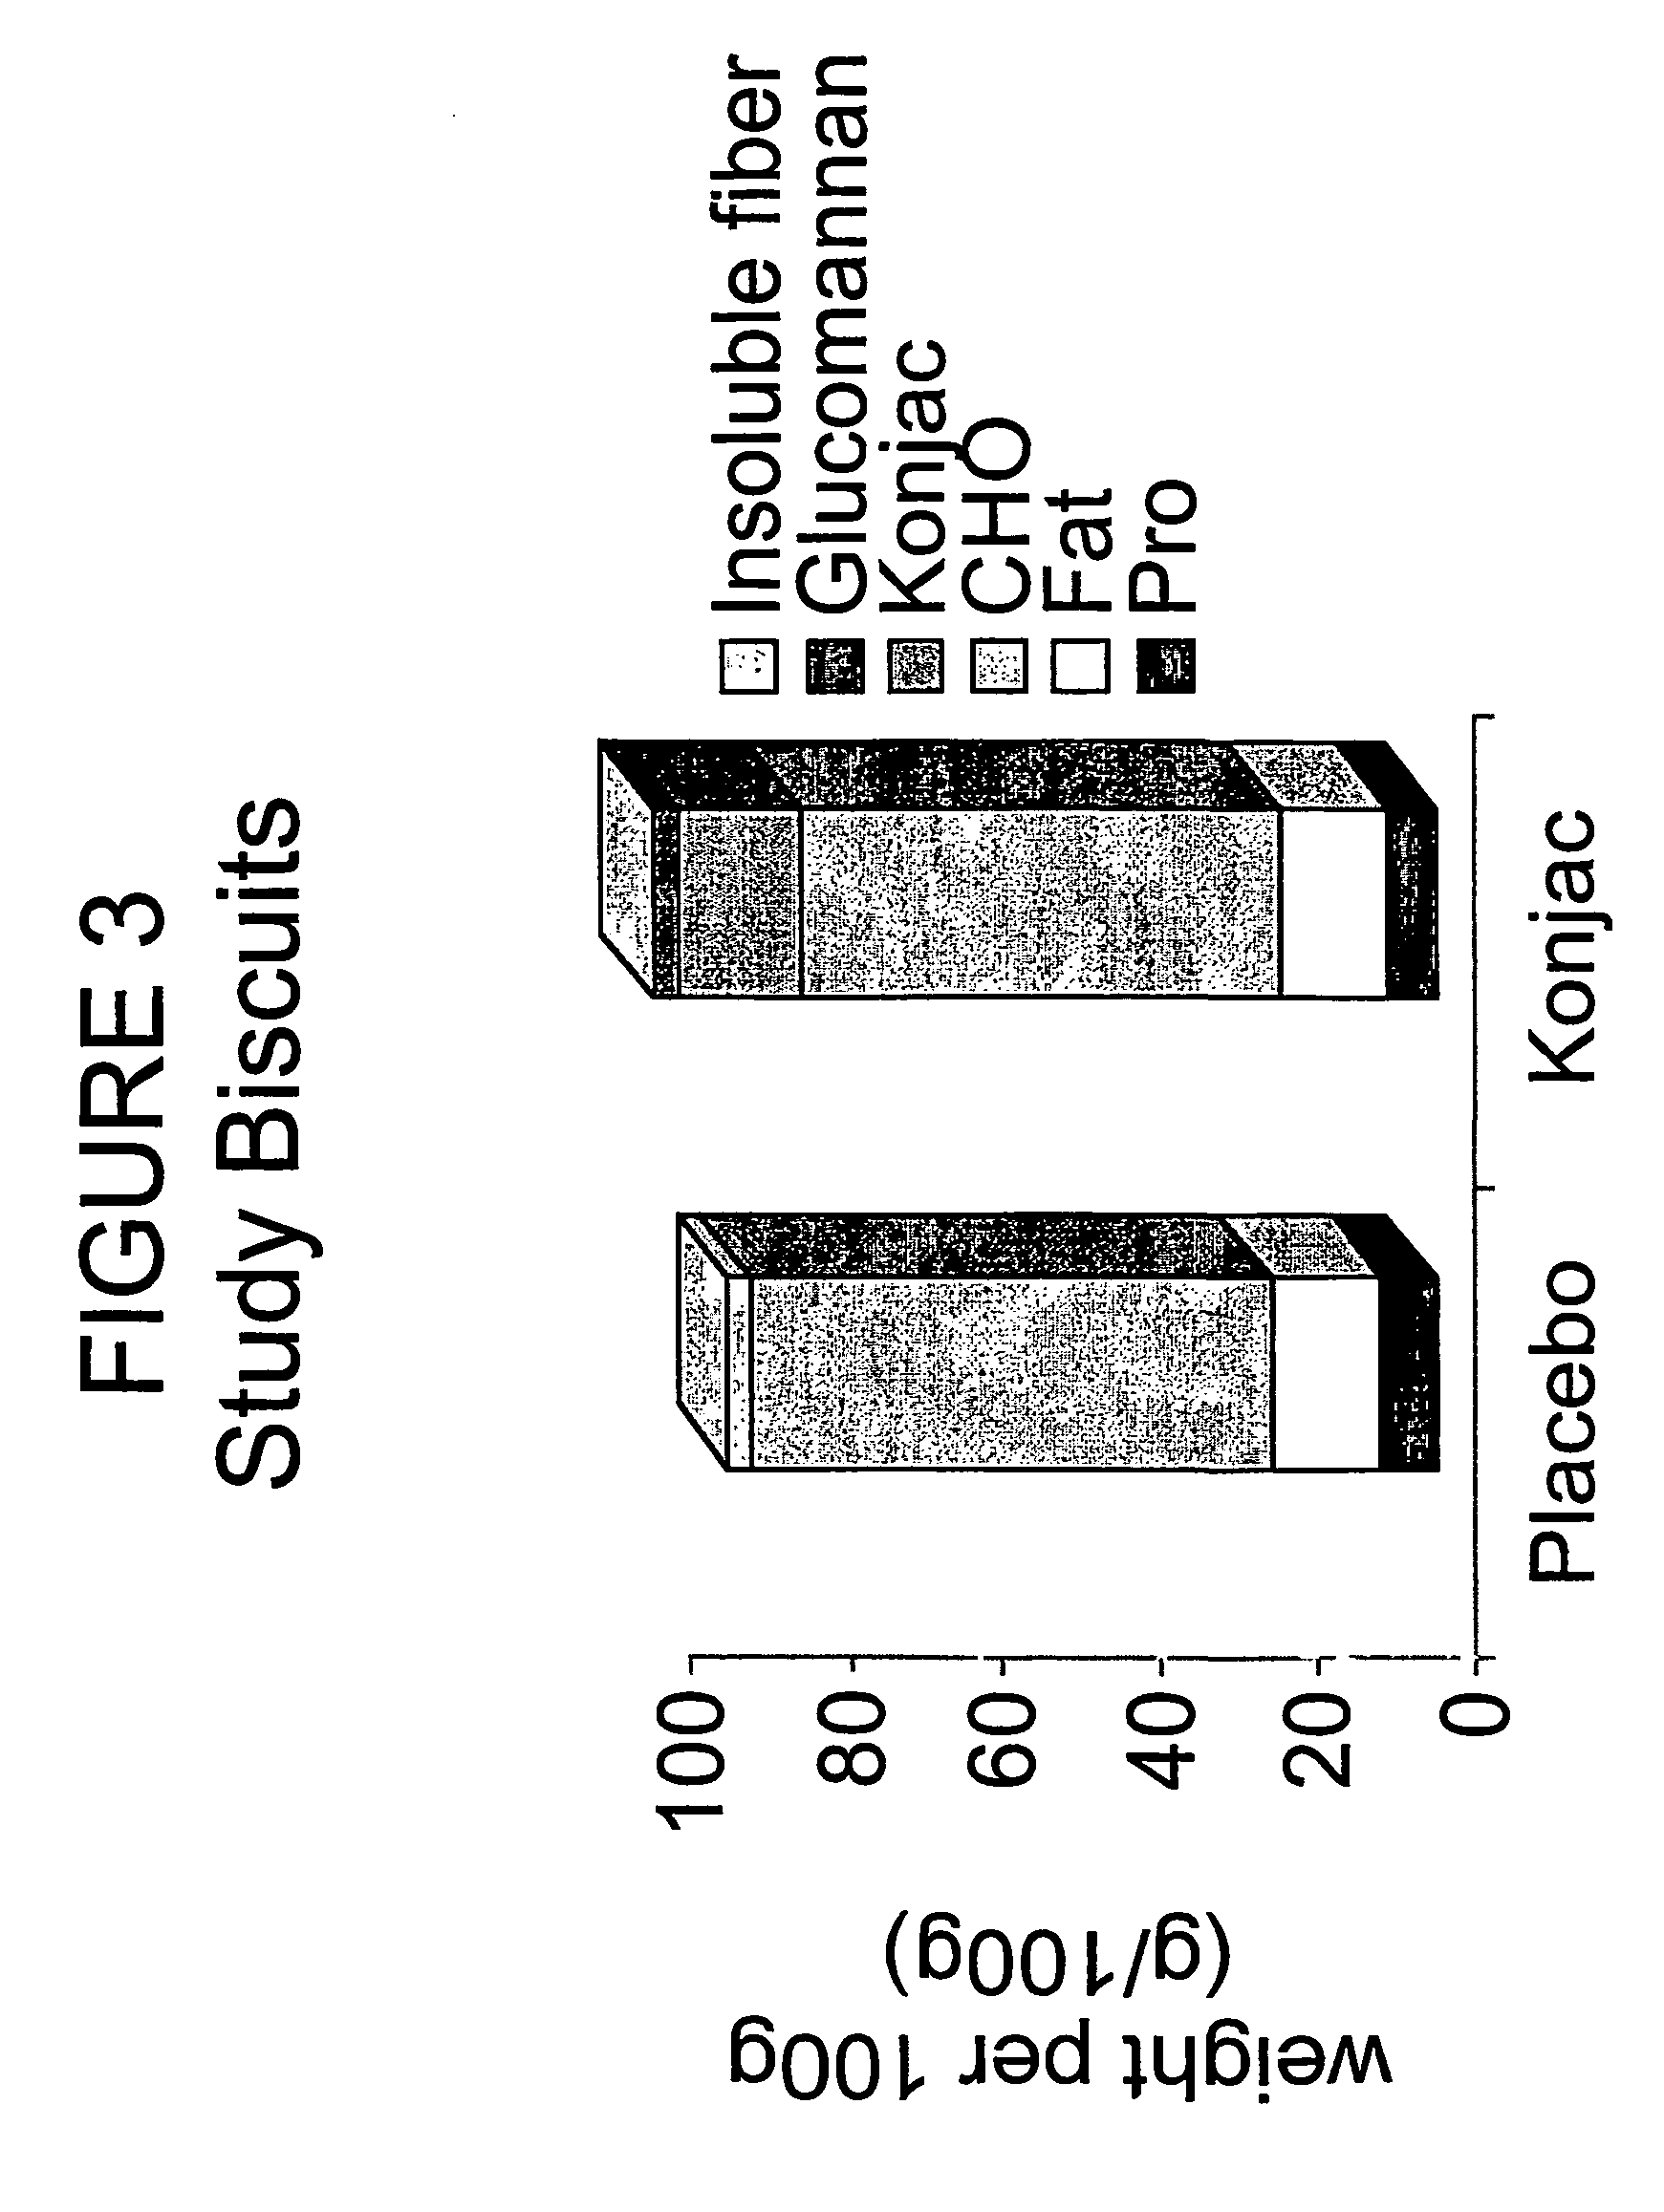 Konjac-mannan and ginseng compositions and methods and uses thereof